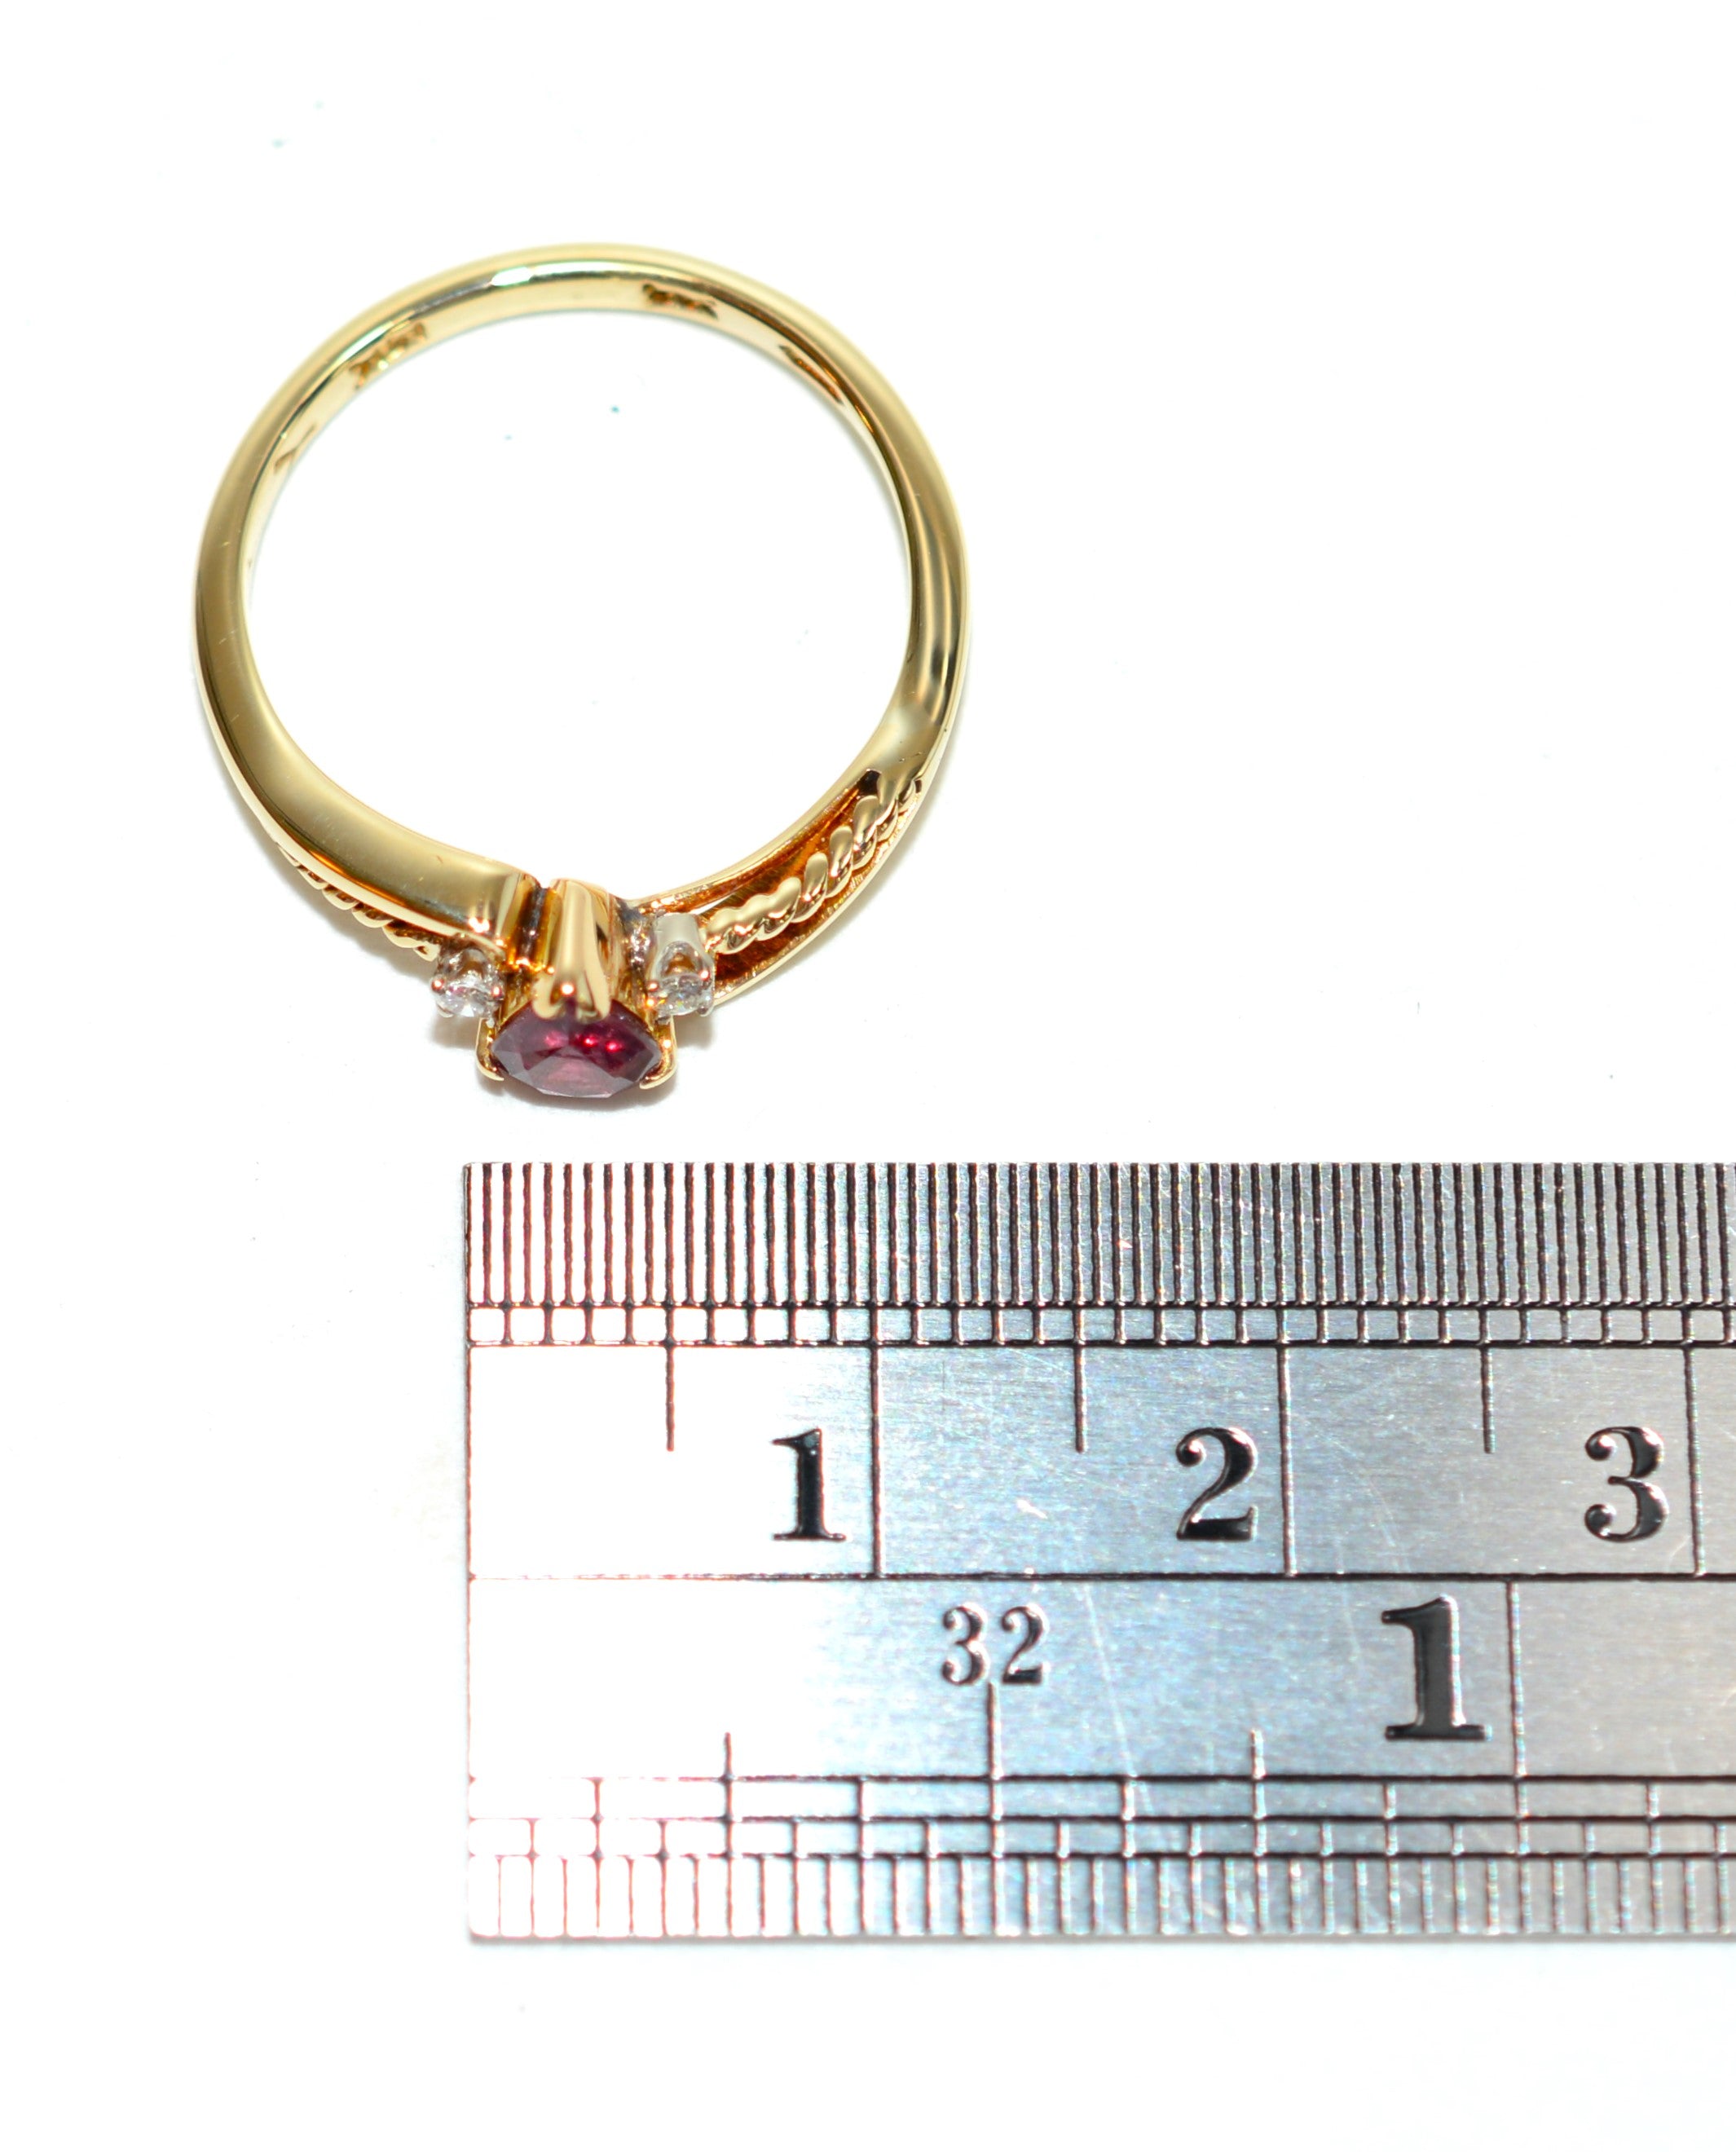 Natural Ruby & Diamond Ring 14K Solid Gold .46tcw Bridal Wedding Engagement Birthstone Statement Cocktail Estate Vintage Jewelry Jewellery